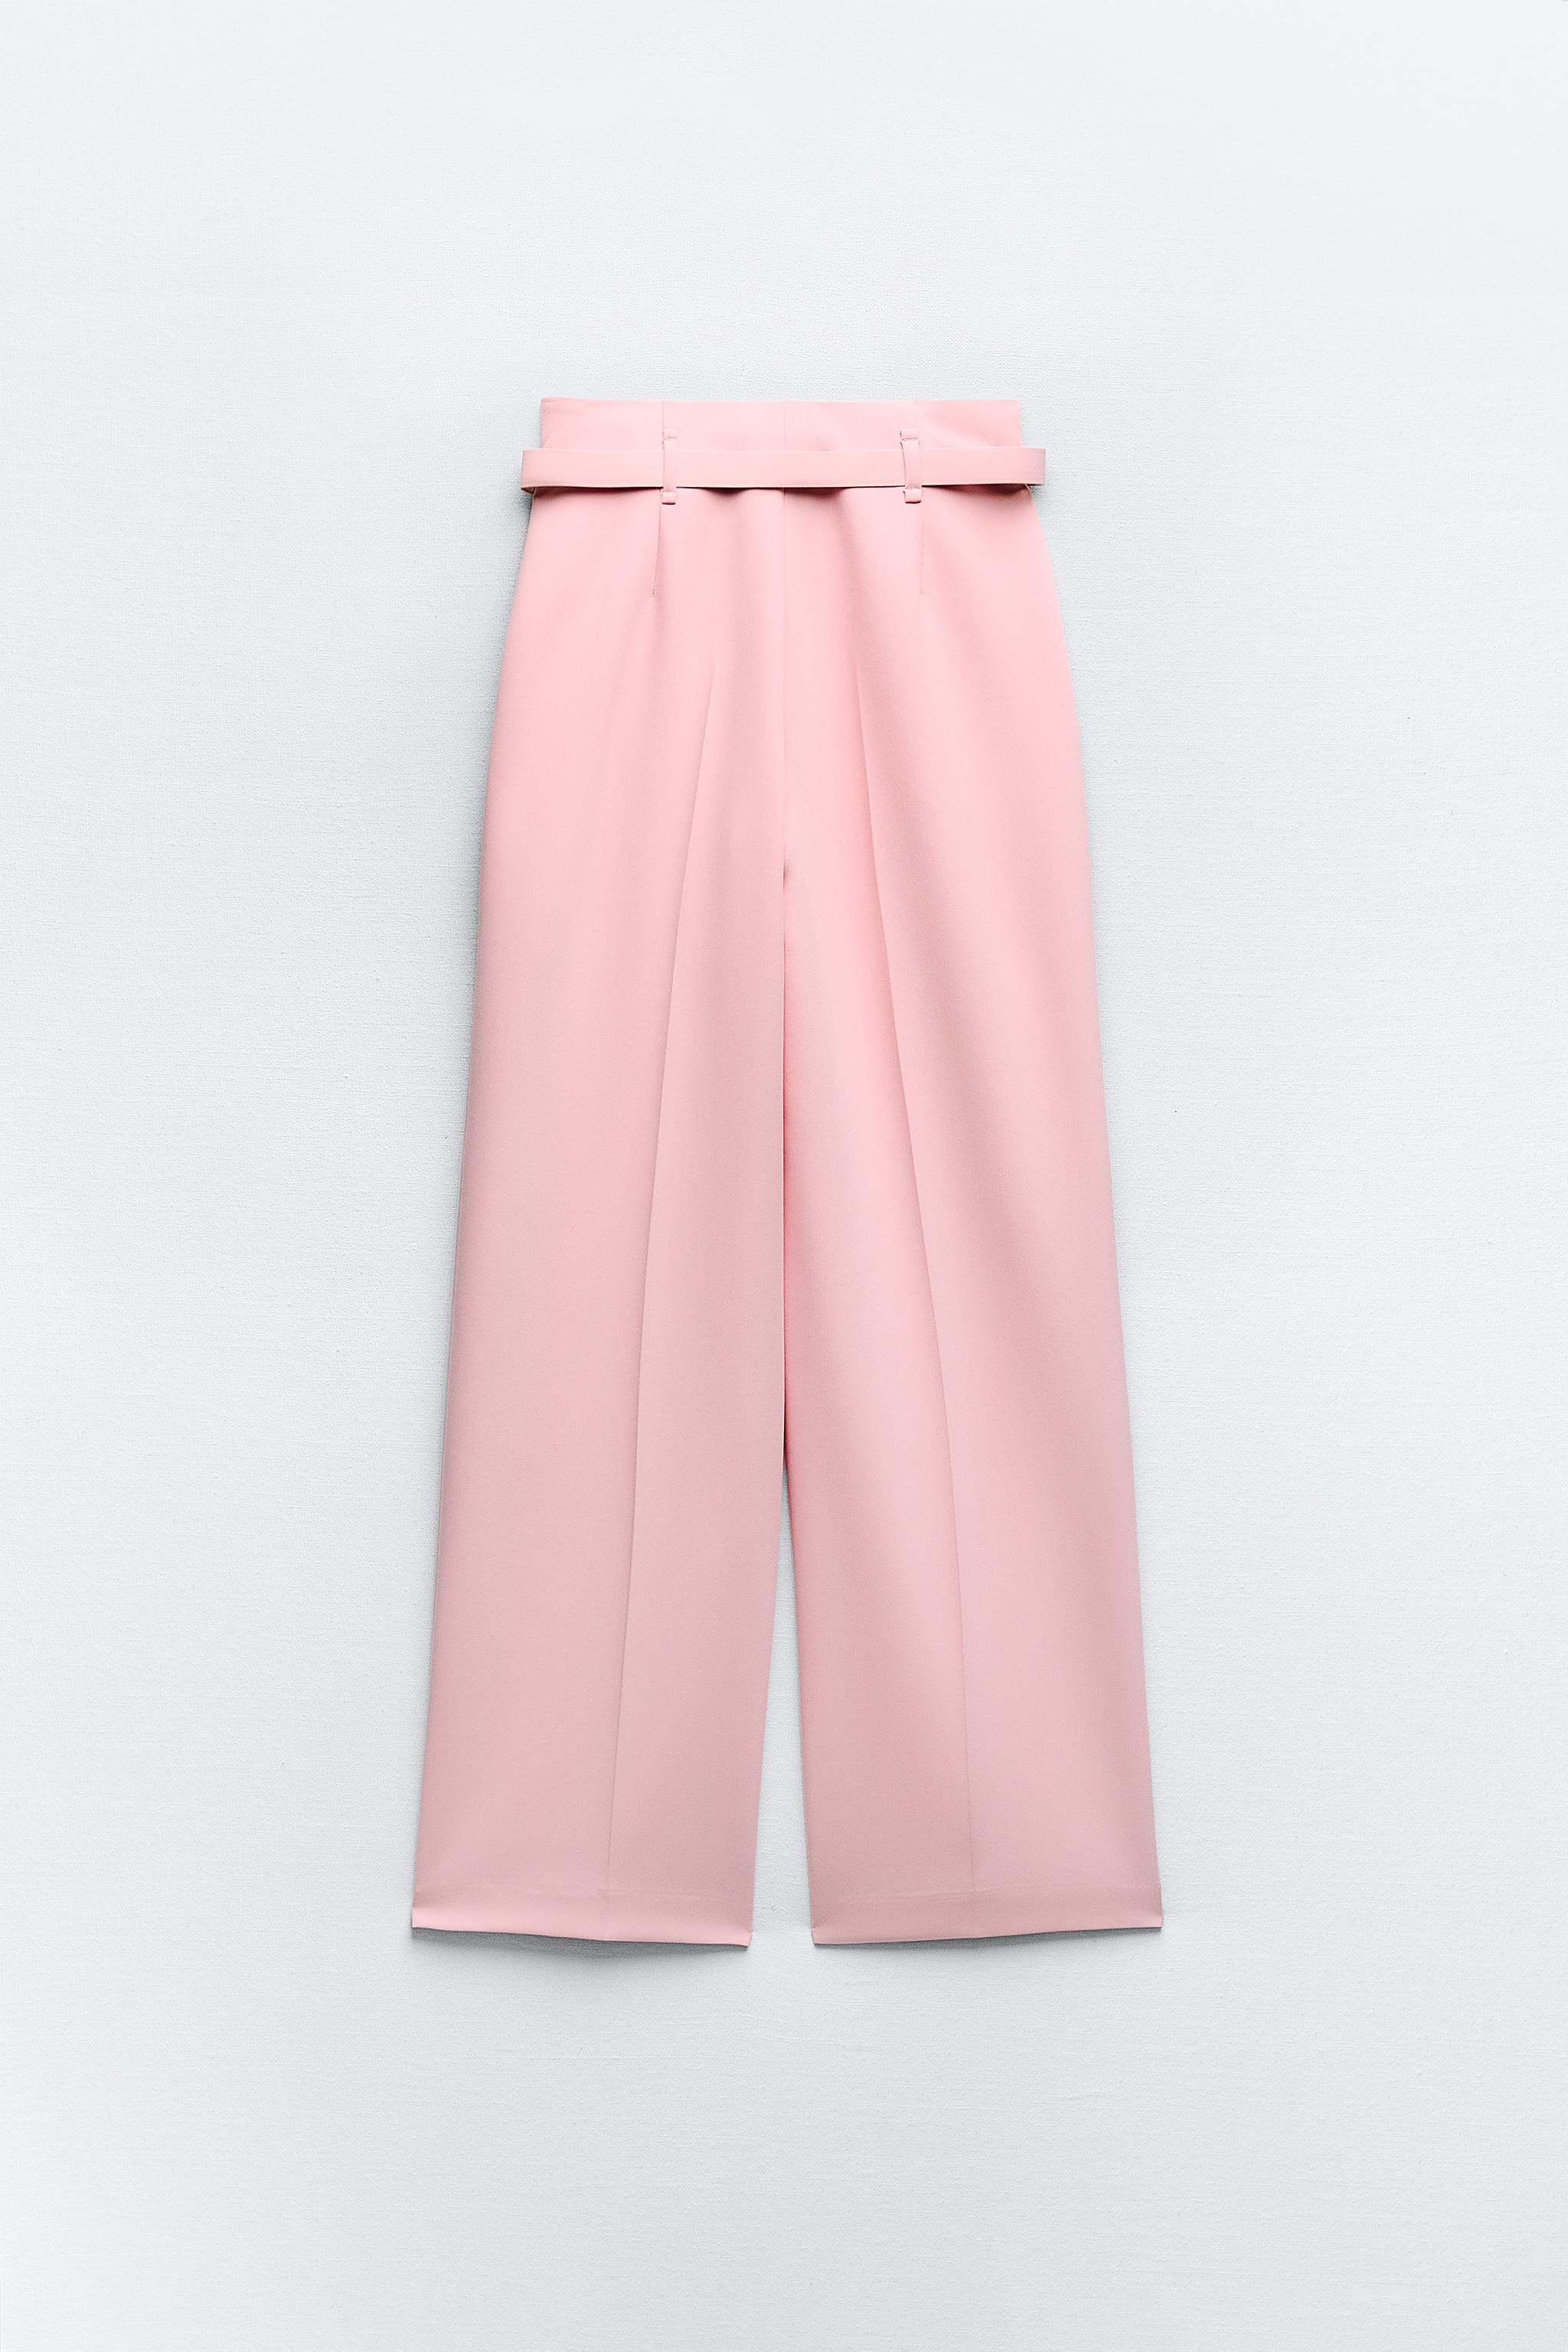 Tall Pink Belted High Waisted Pants